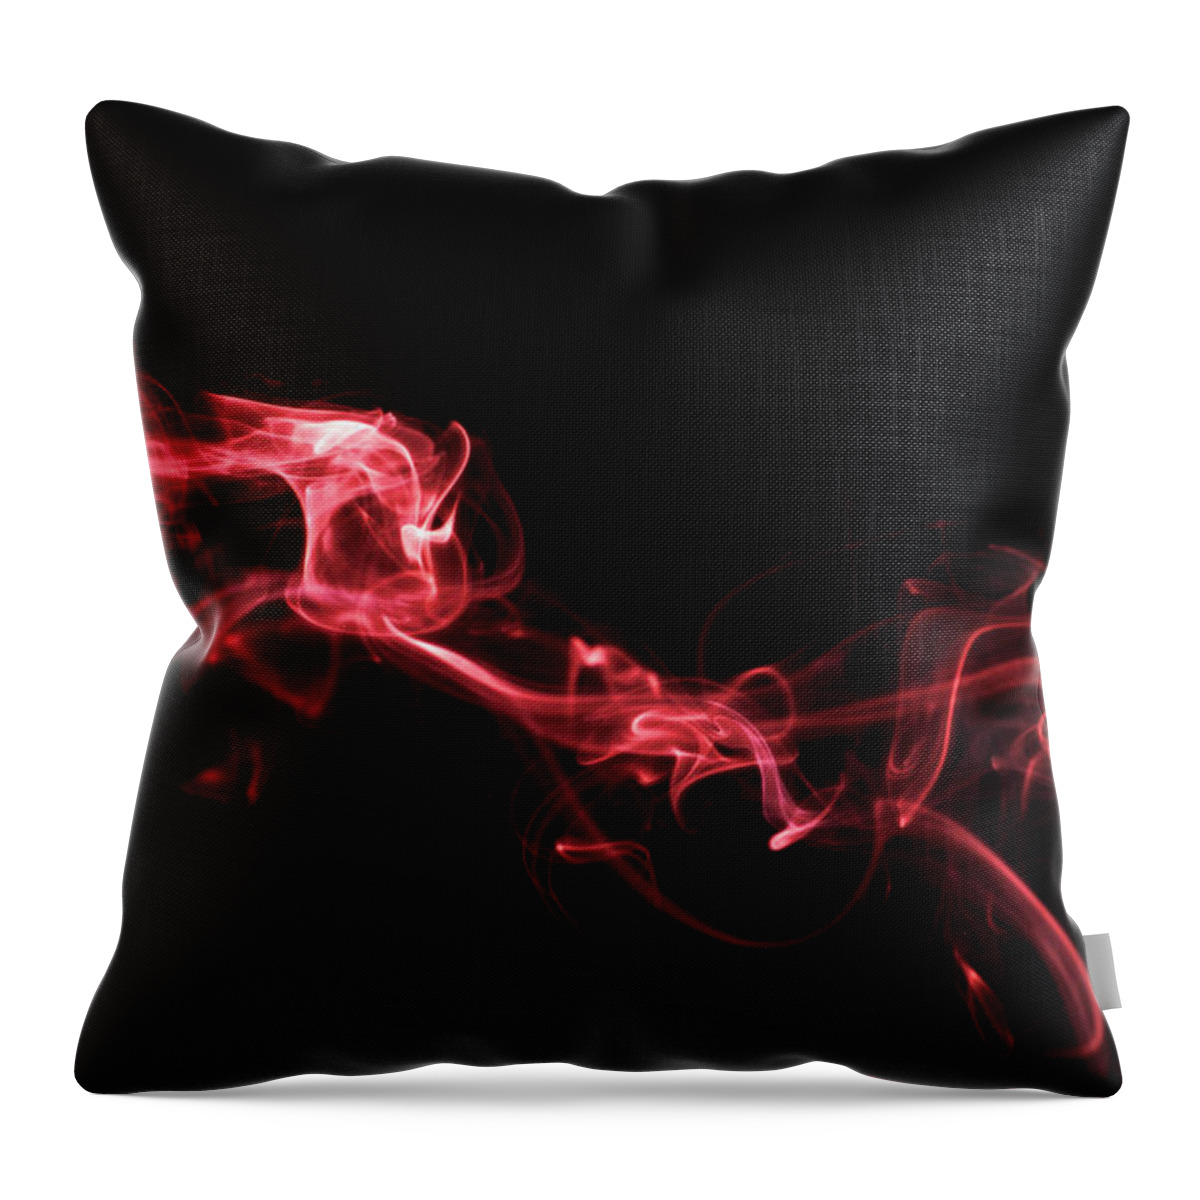 Smoke Throw Pillow featuring the photograph Red Vapor by Lawrence Knutsson